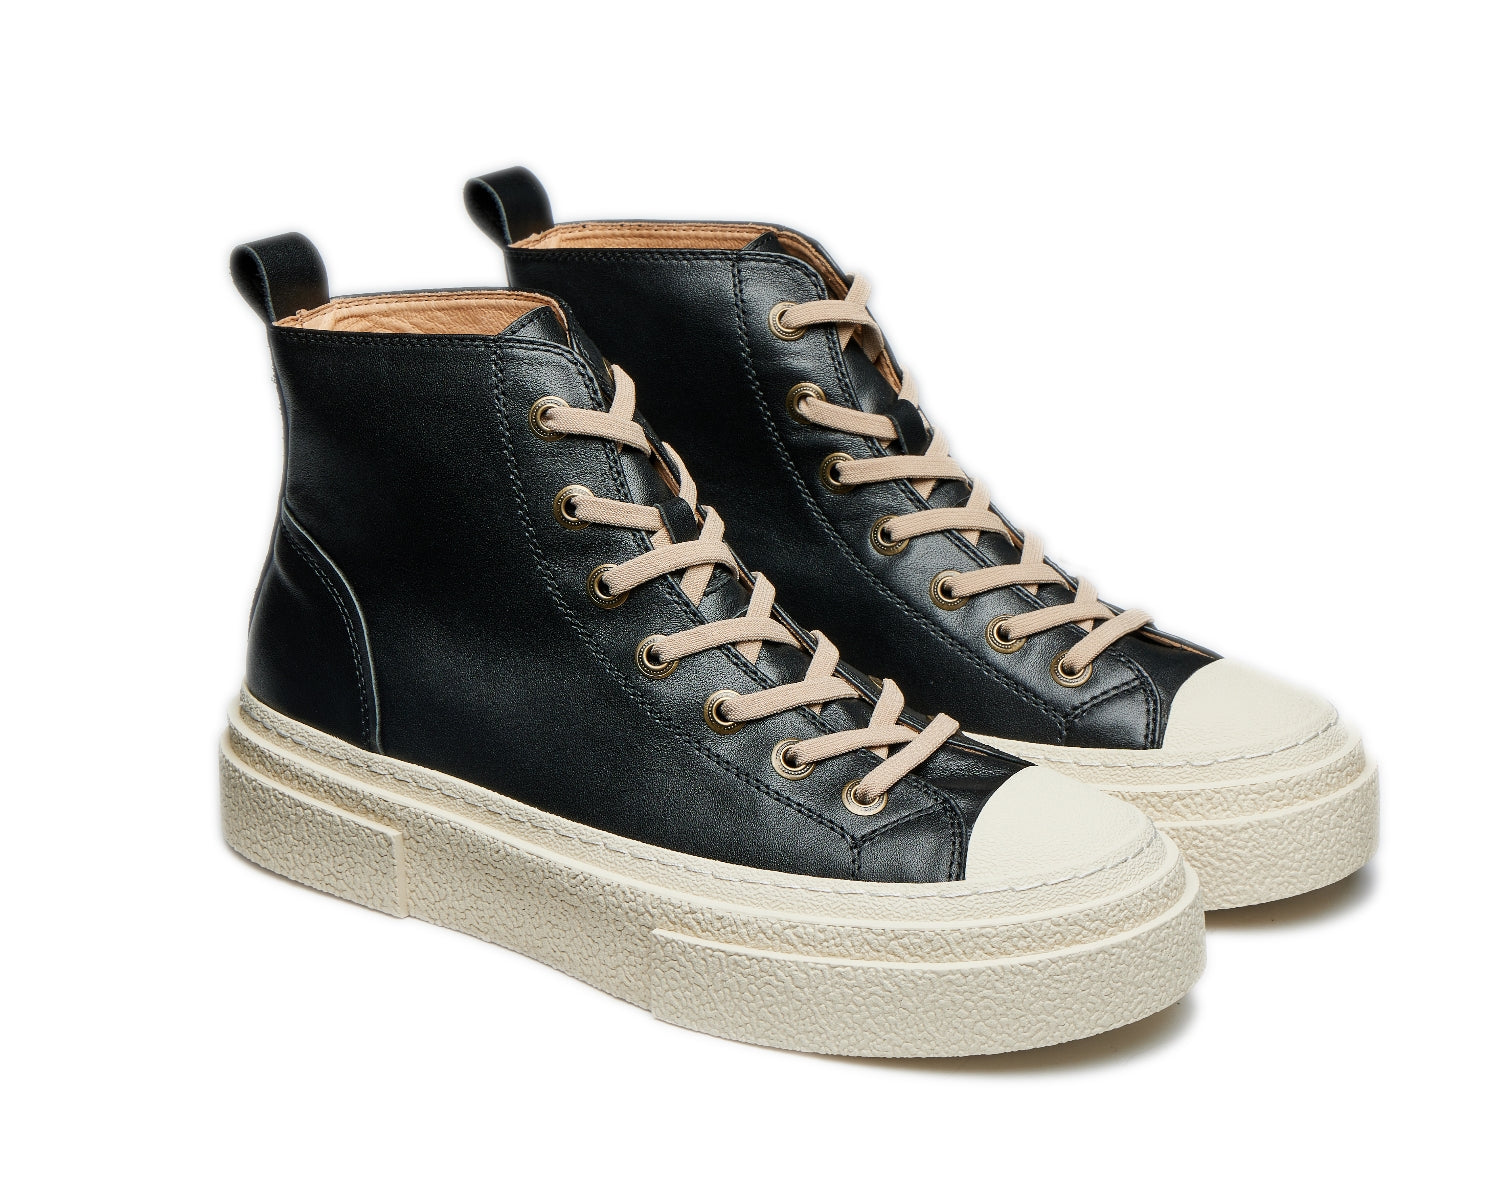 Men's thick-soled high-top genuine leather sports retro sneakers boots1